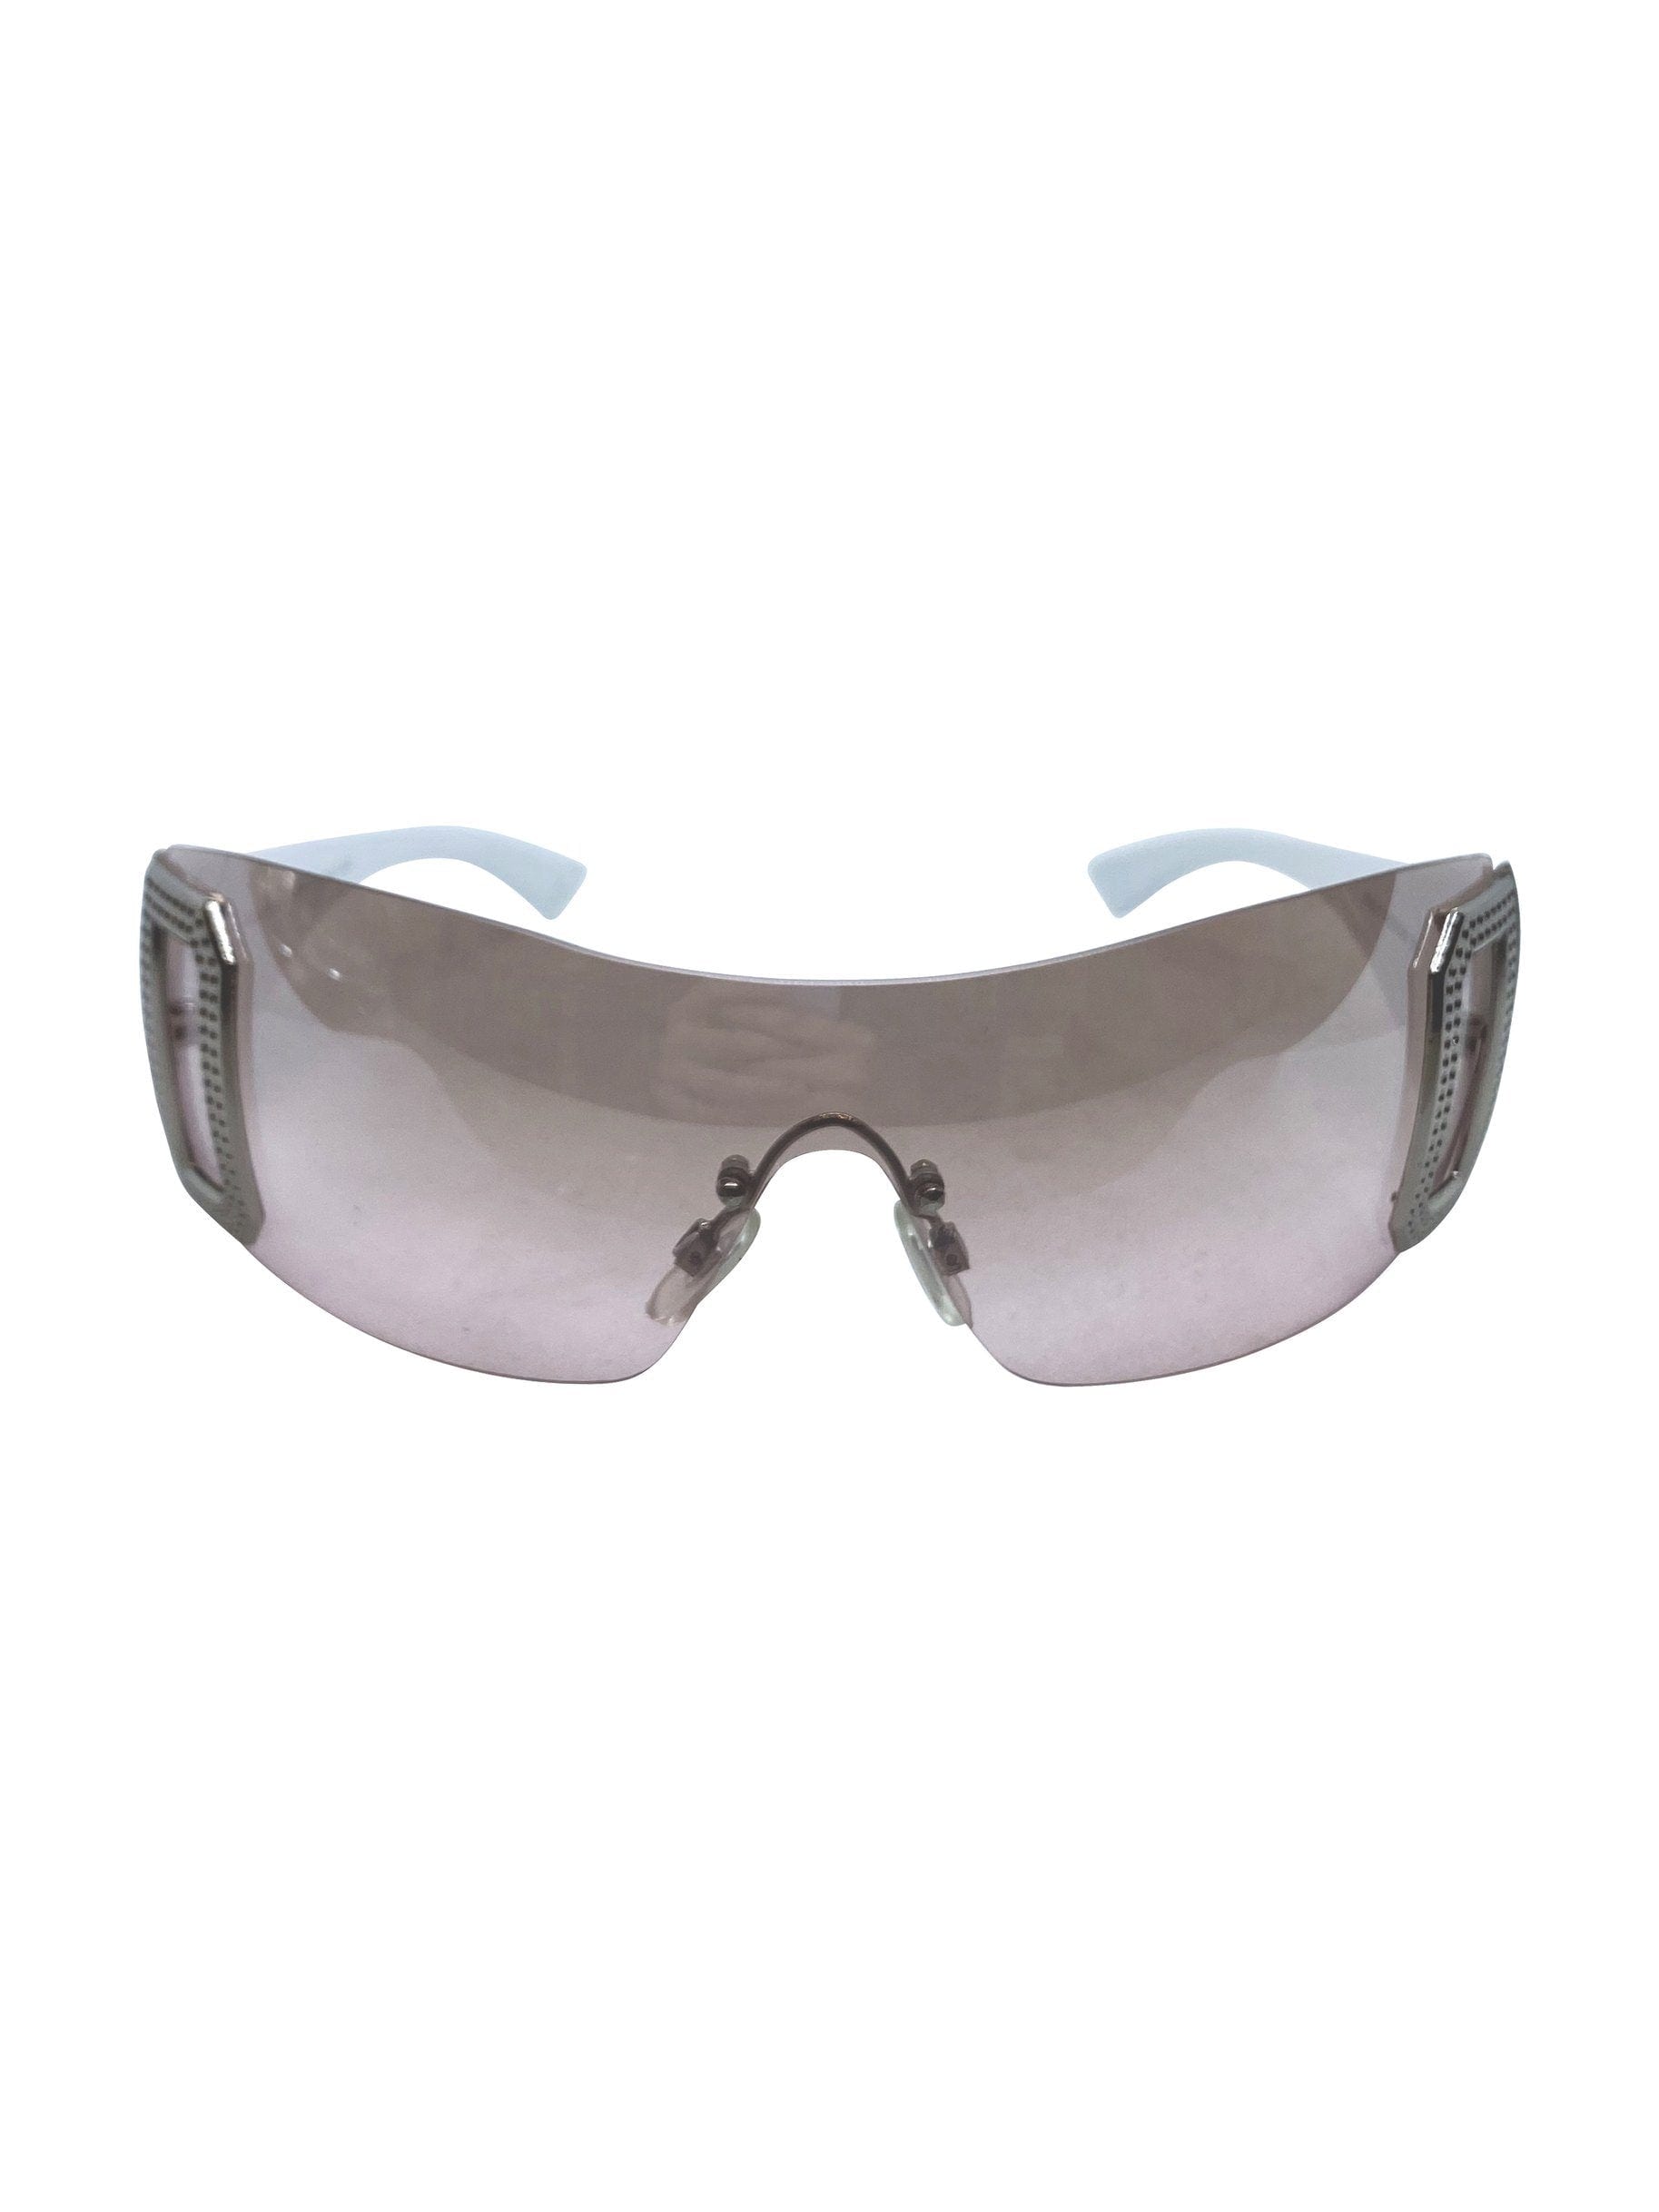 GHOSTED Pink Rimless Shield Sunglasses